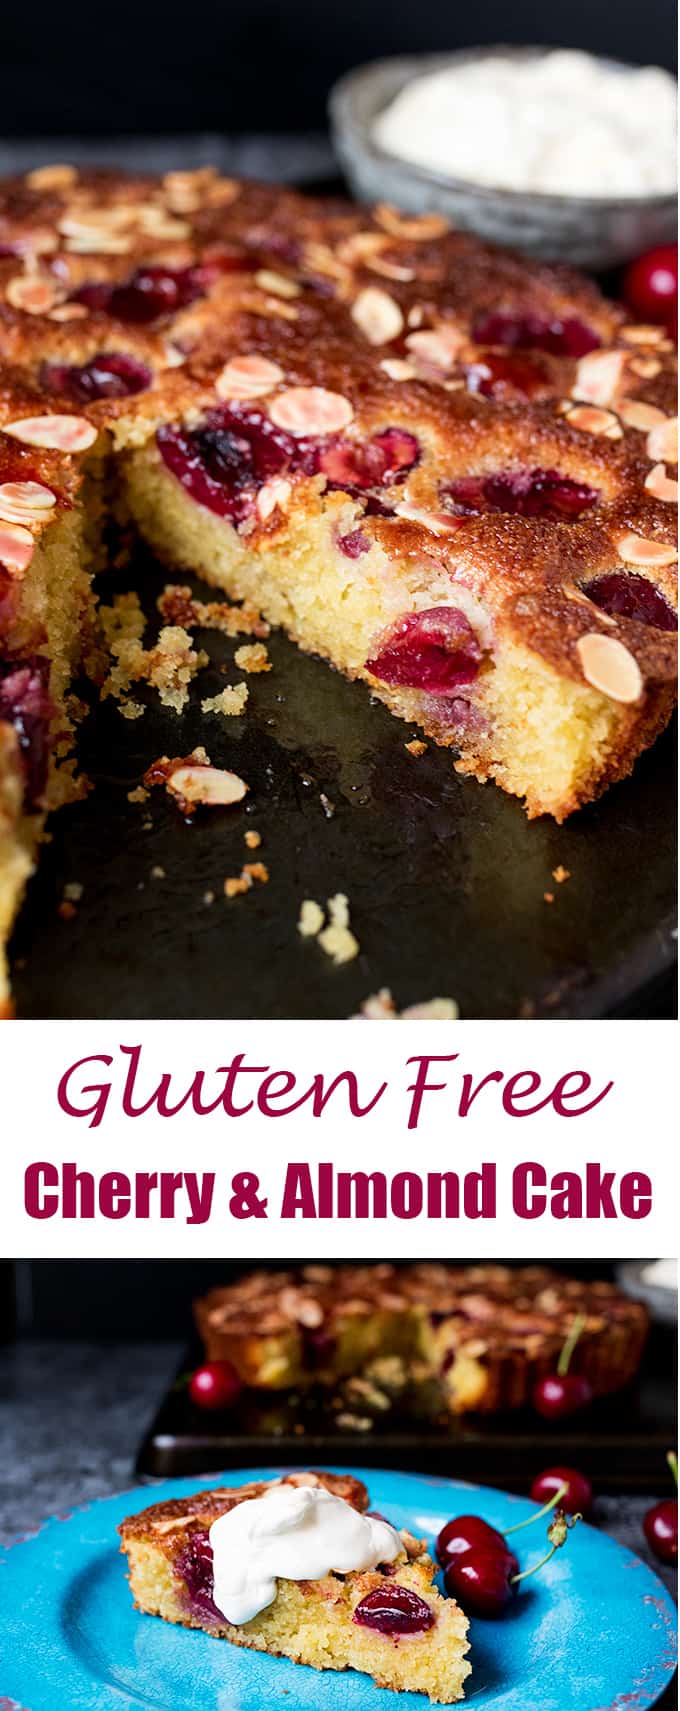 A fluffy Gluten Free Cherry and Almond Cake with fresh cherries and dollops of jam. So tasty!